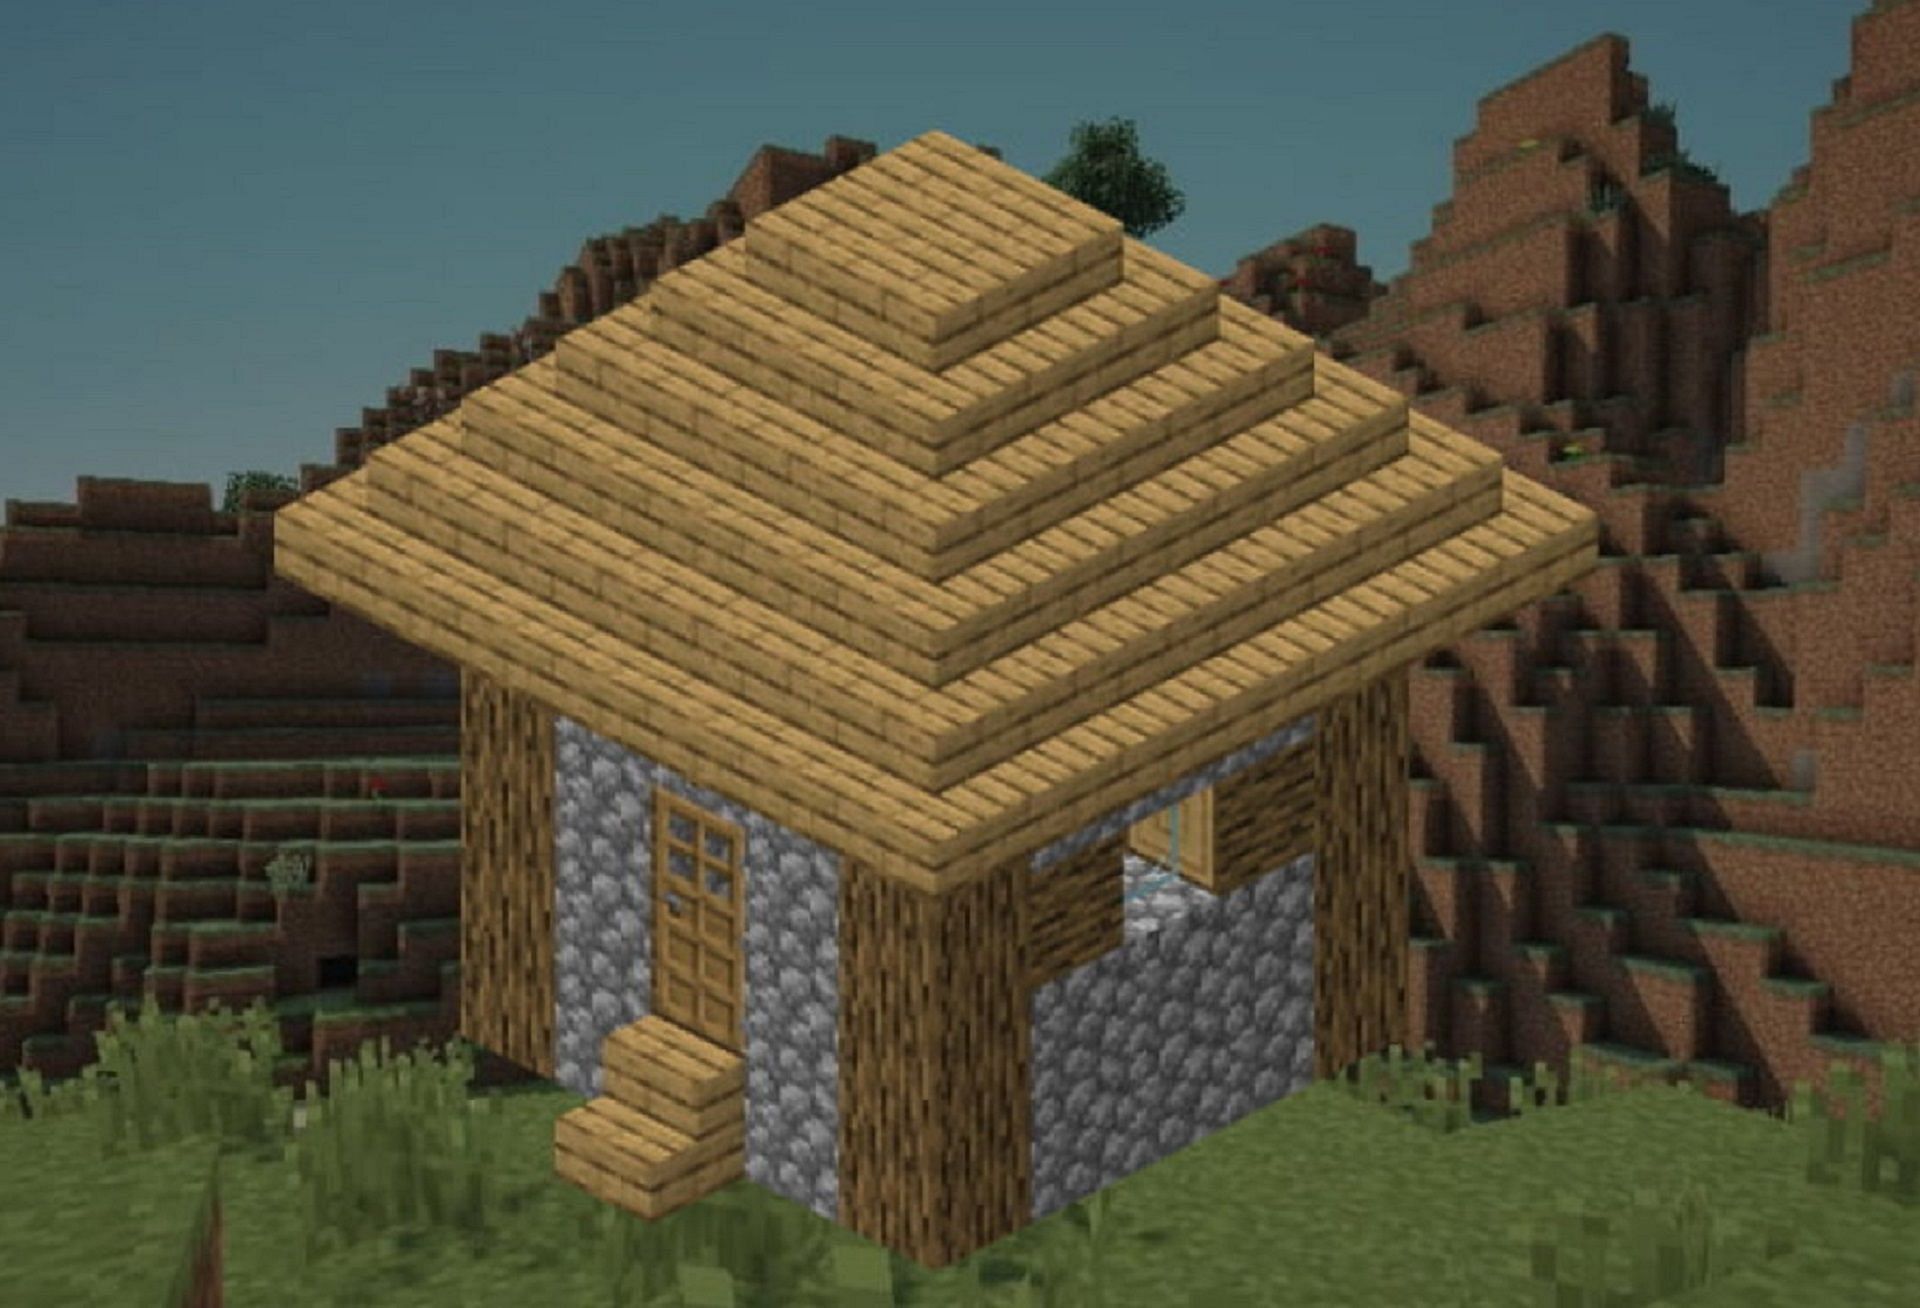 A standard villager house in Minecraft (Image via Mojang)